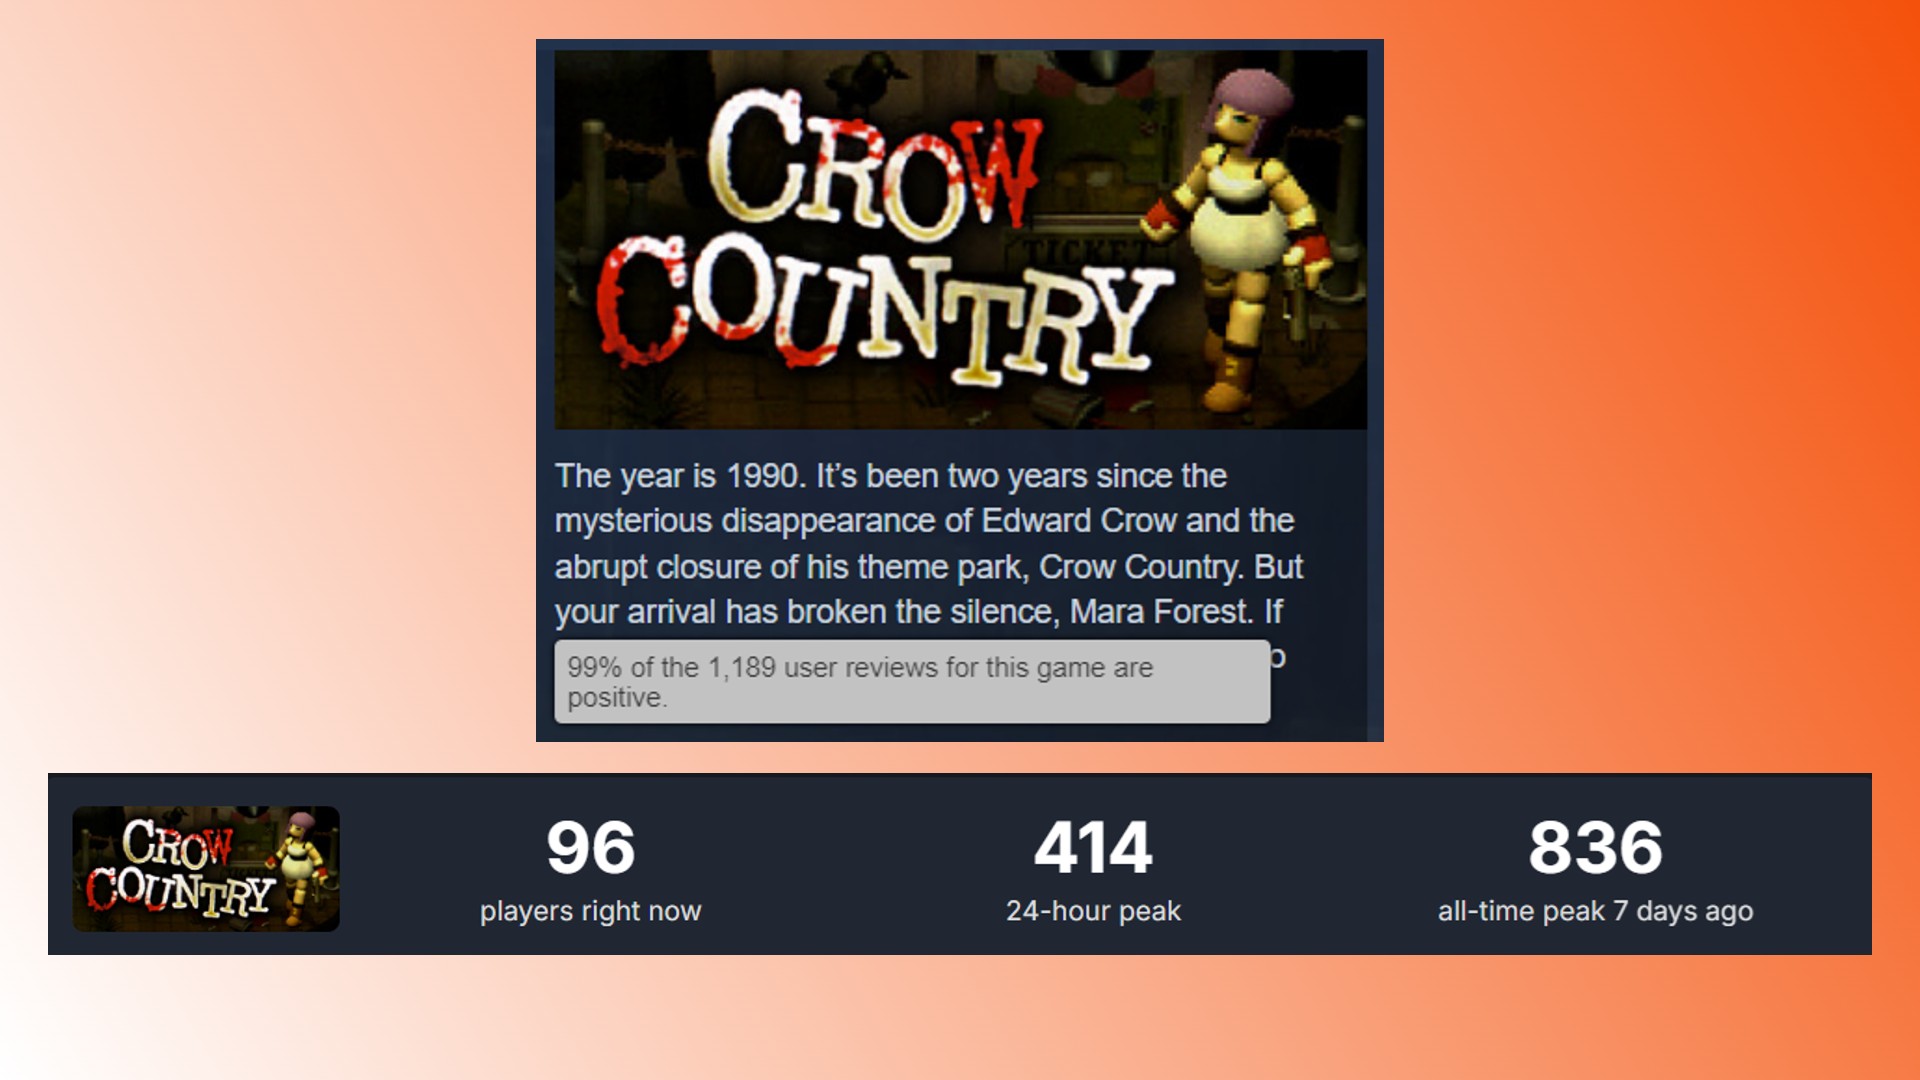 Crow Country Steam survival horror game: Player count numbers from Steam horror game Crow Country